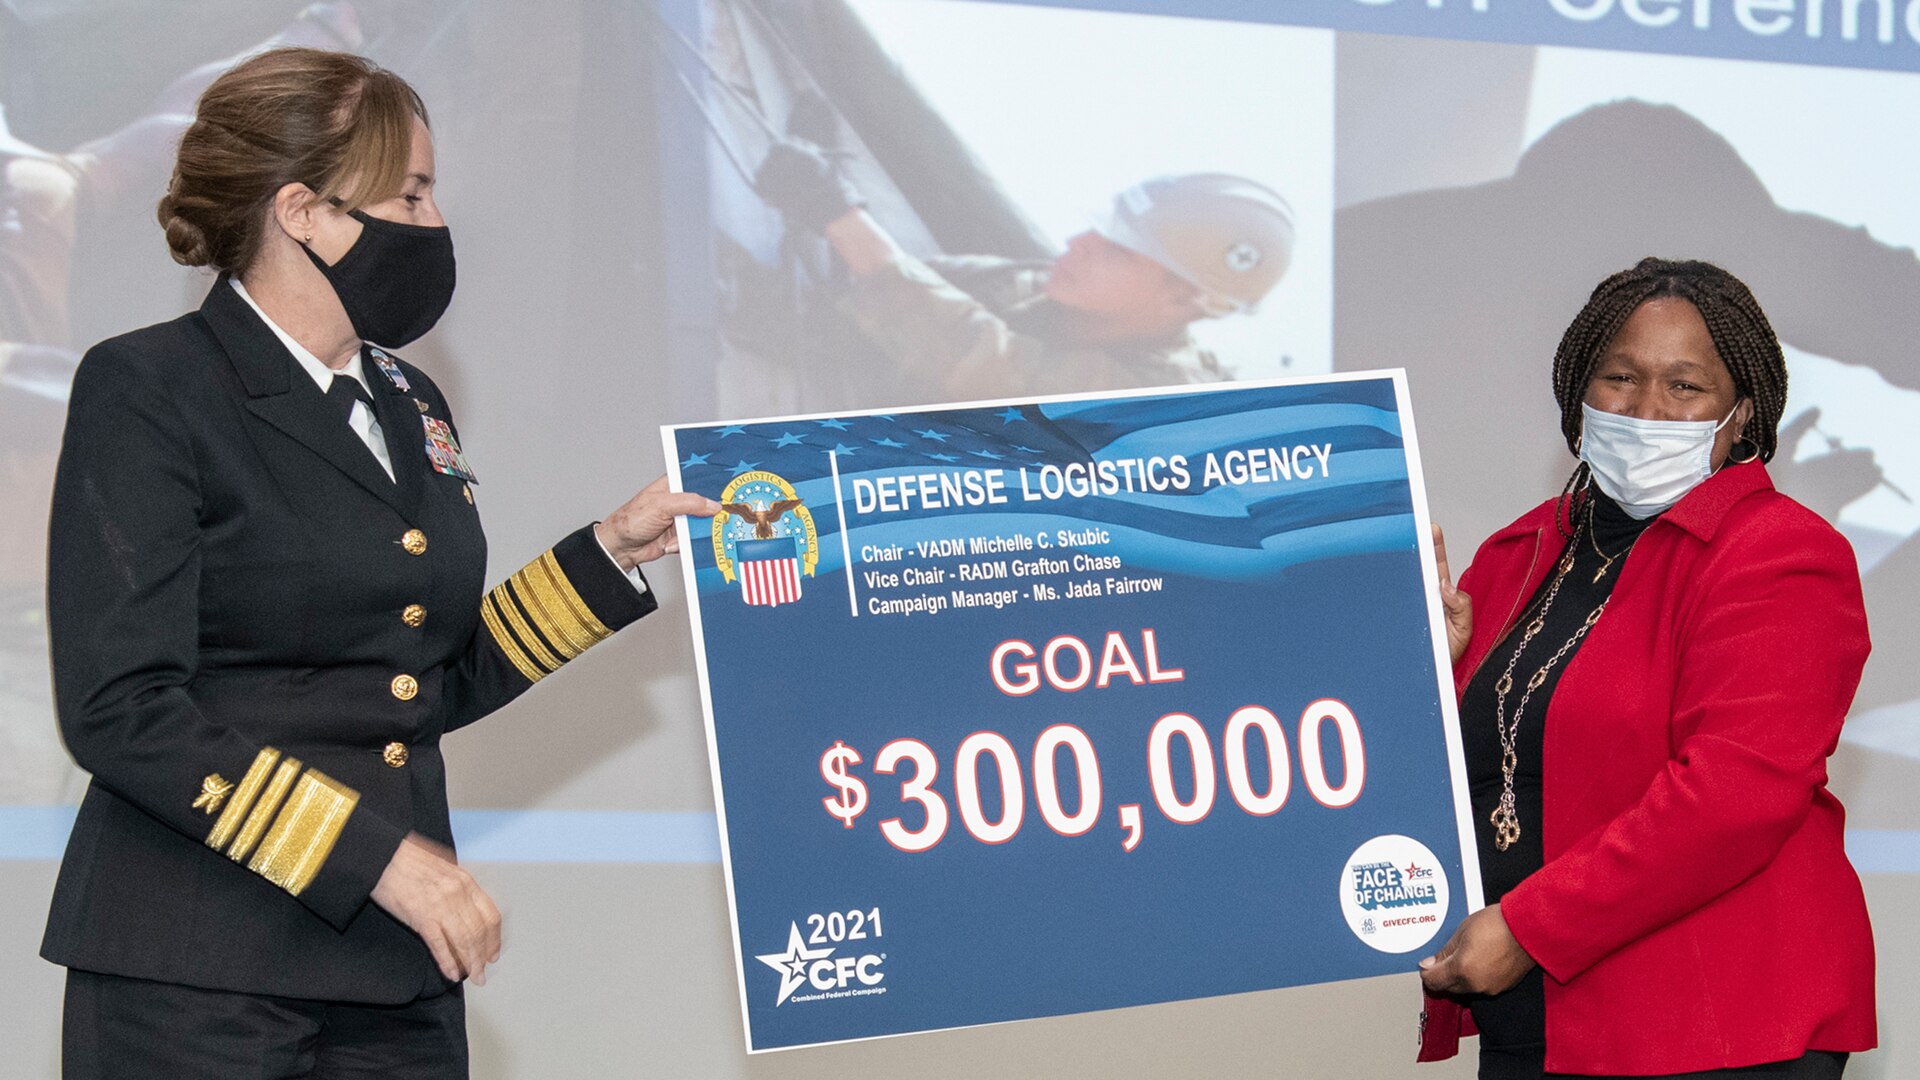 Two women - one in Navy dress uniform, one in a red jacket - stand holding a sign between them that says GOAL $300,000.